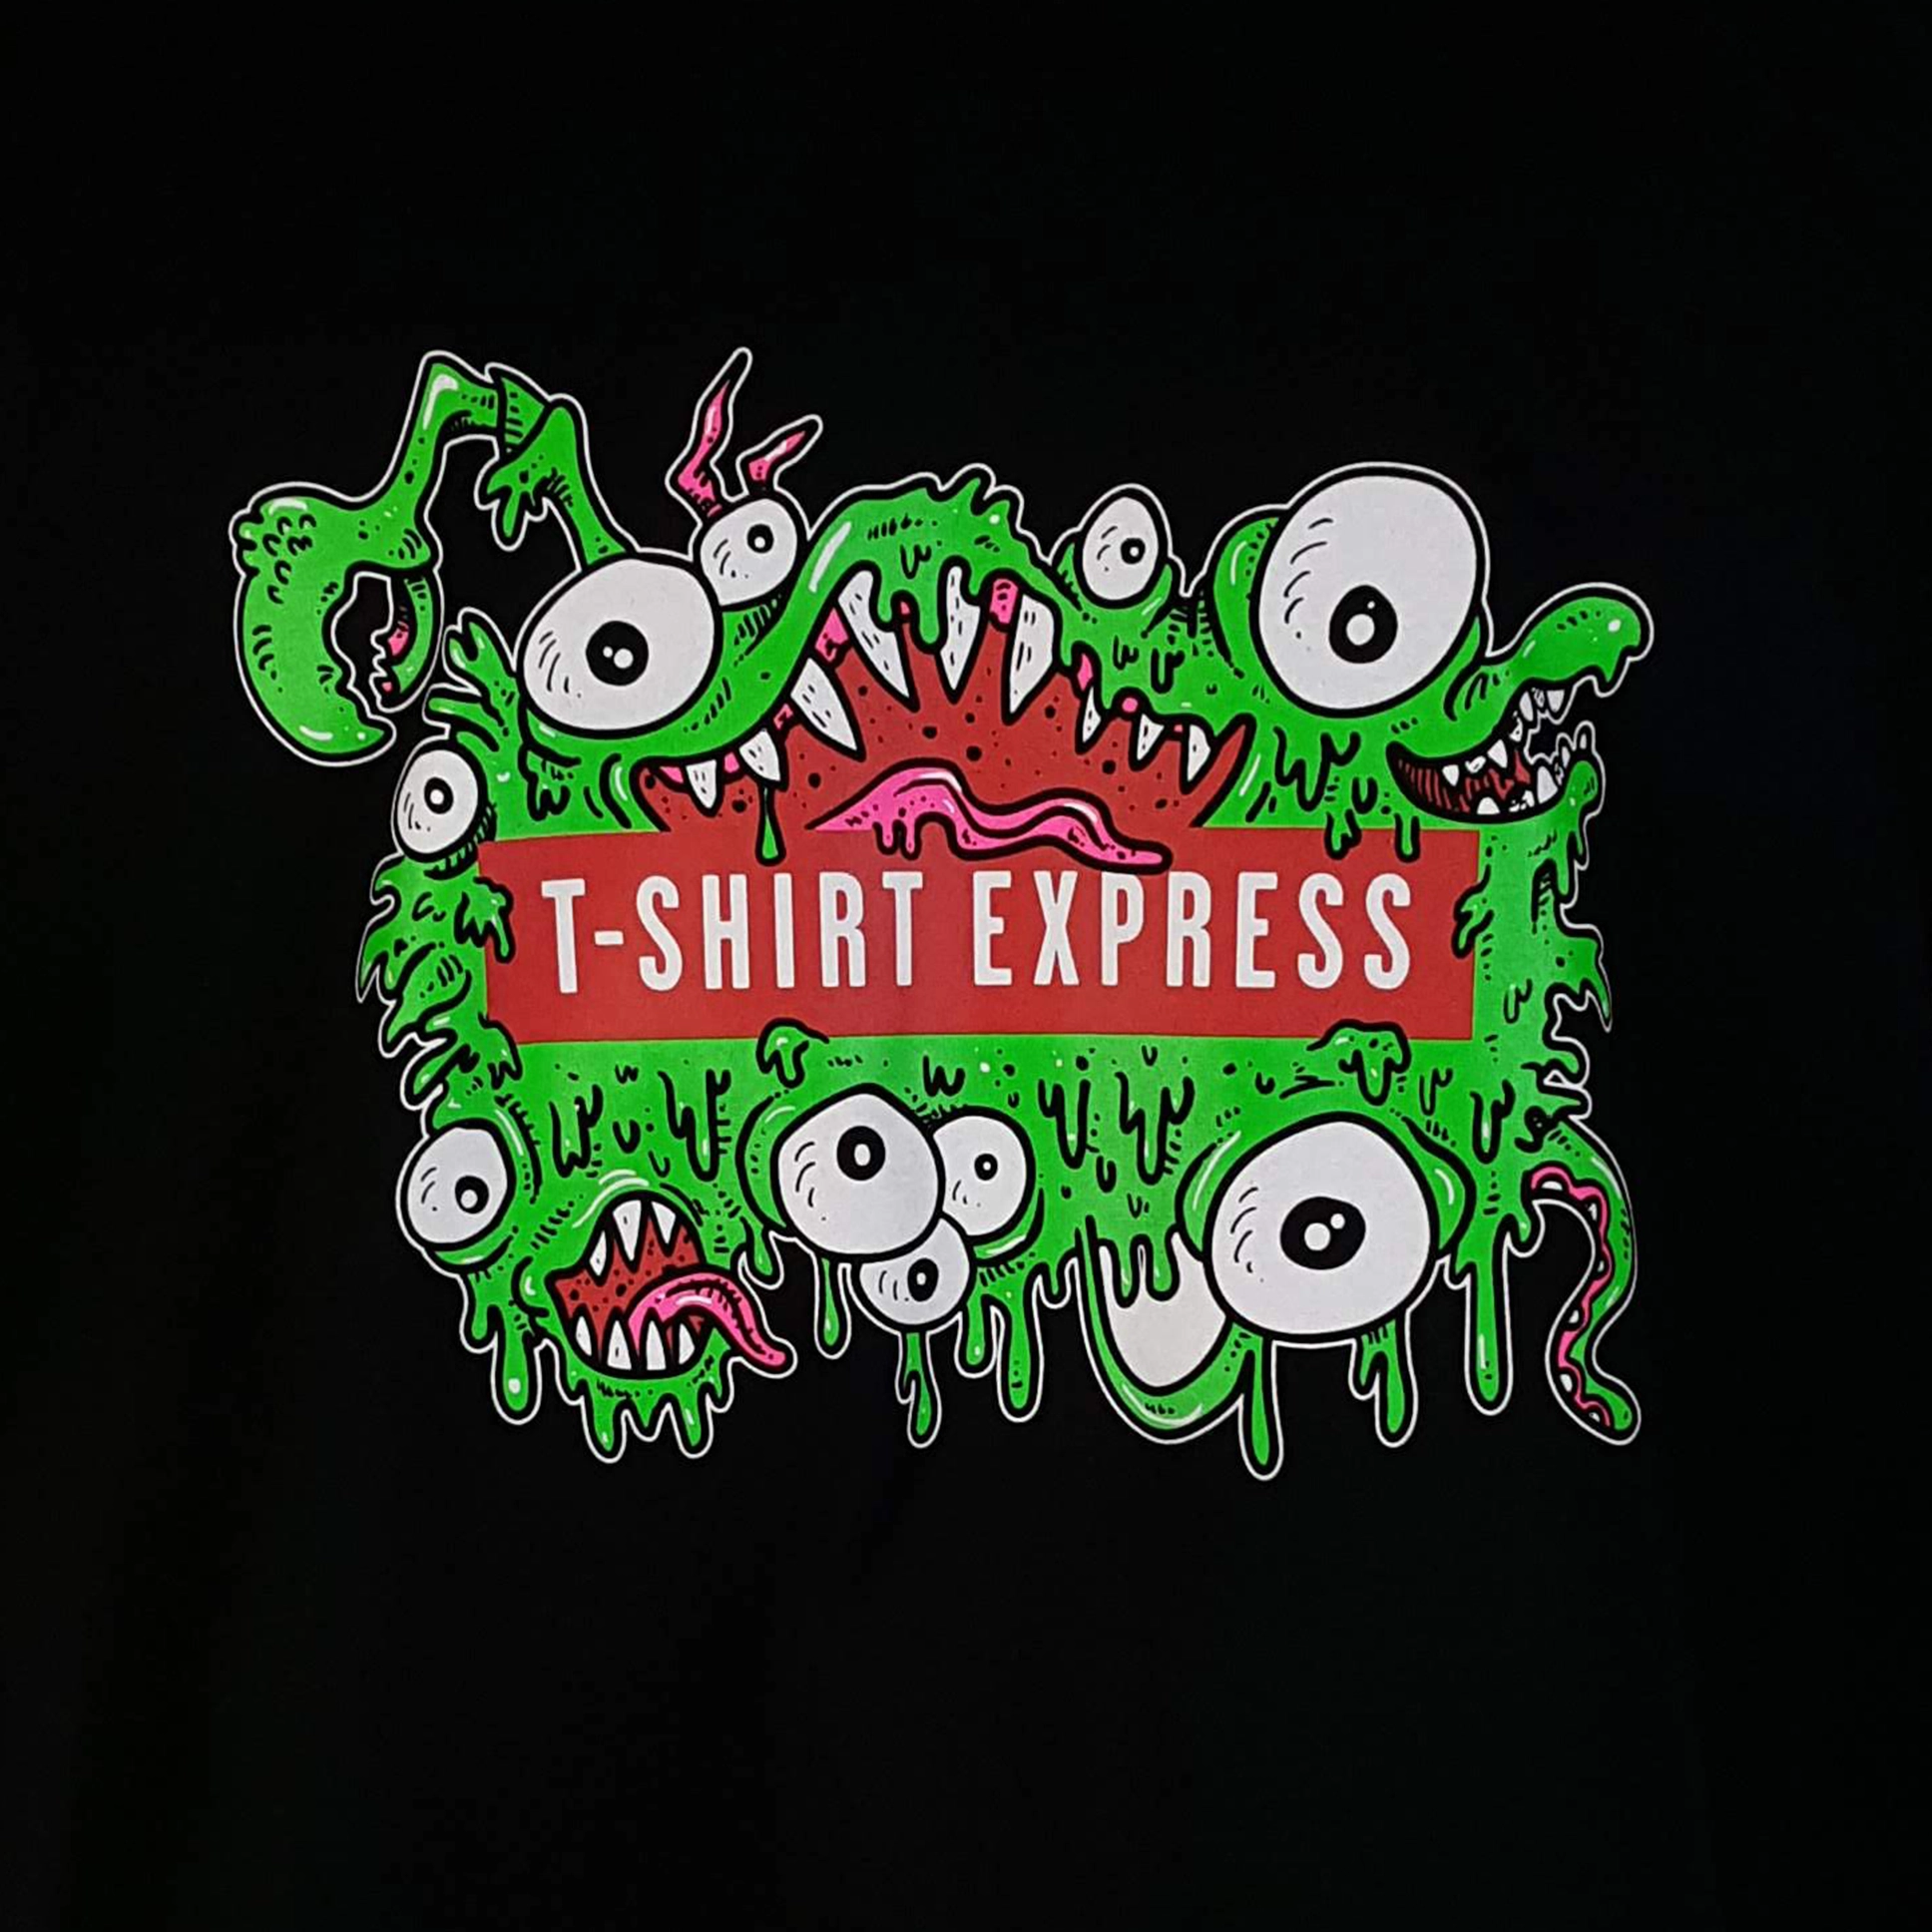 t-shirt express in South Bay ohio